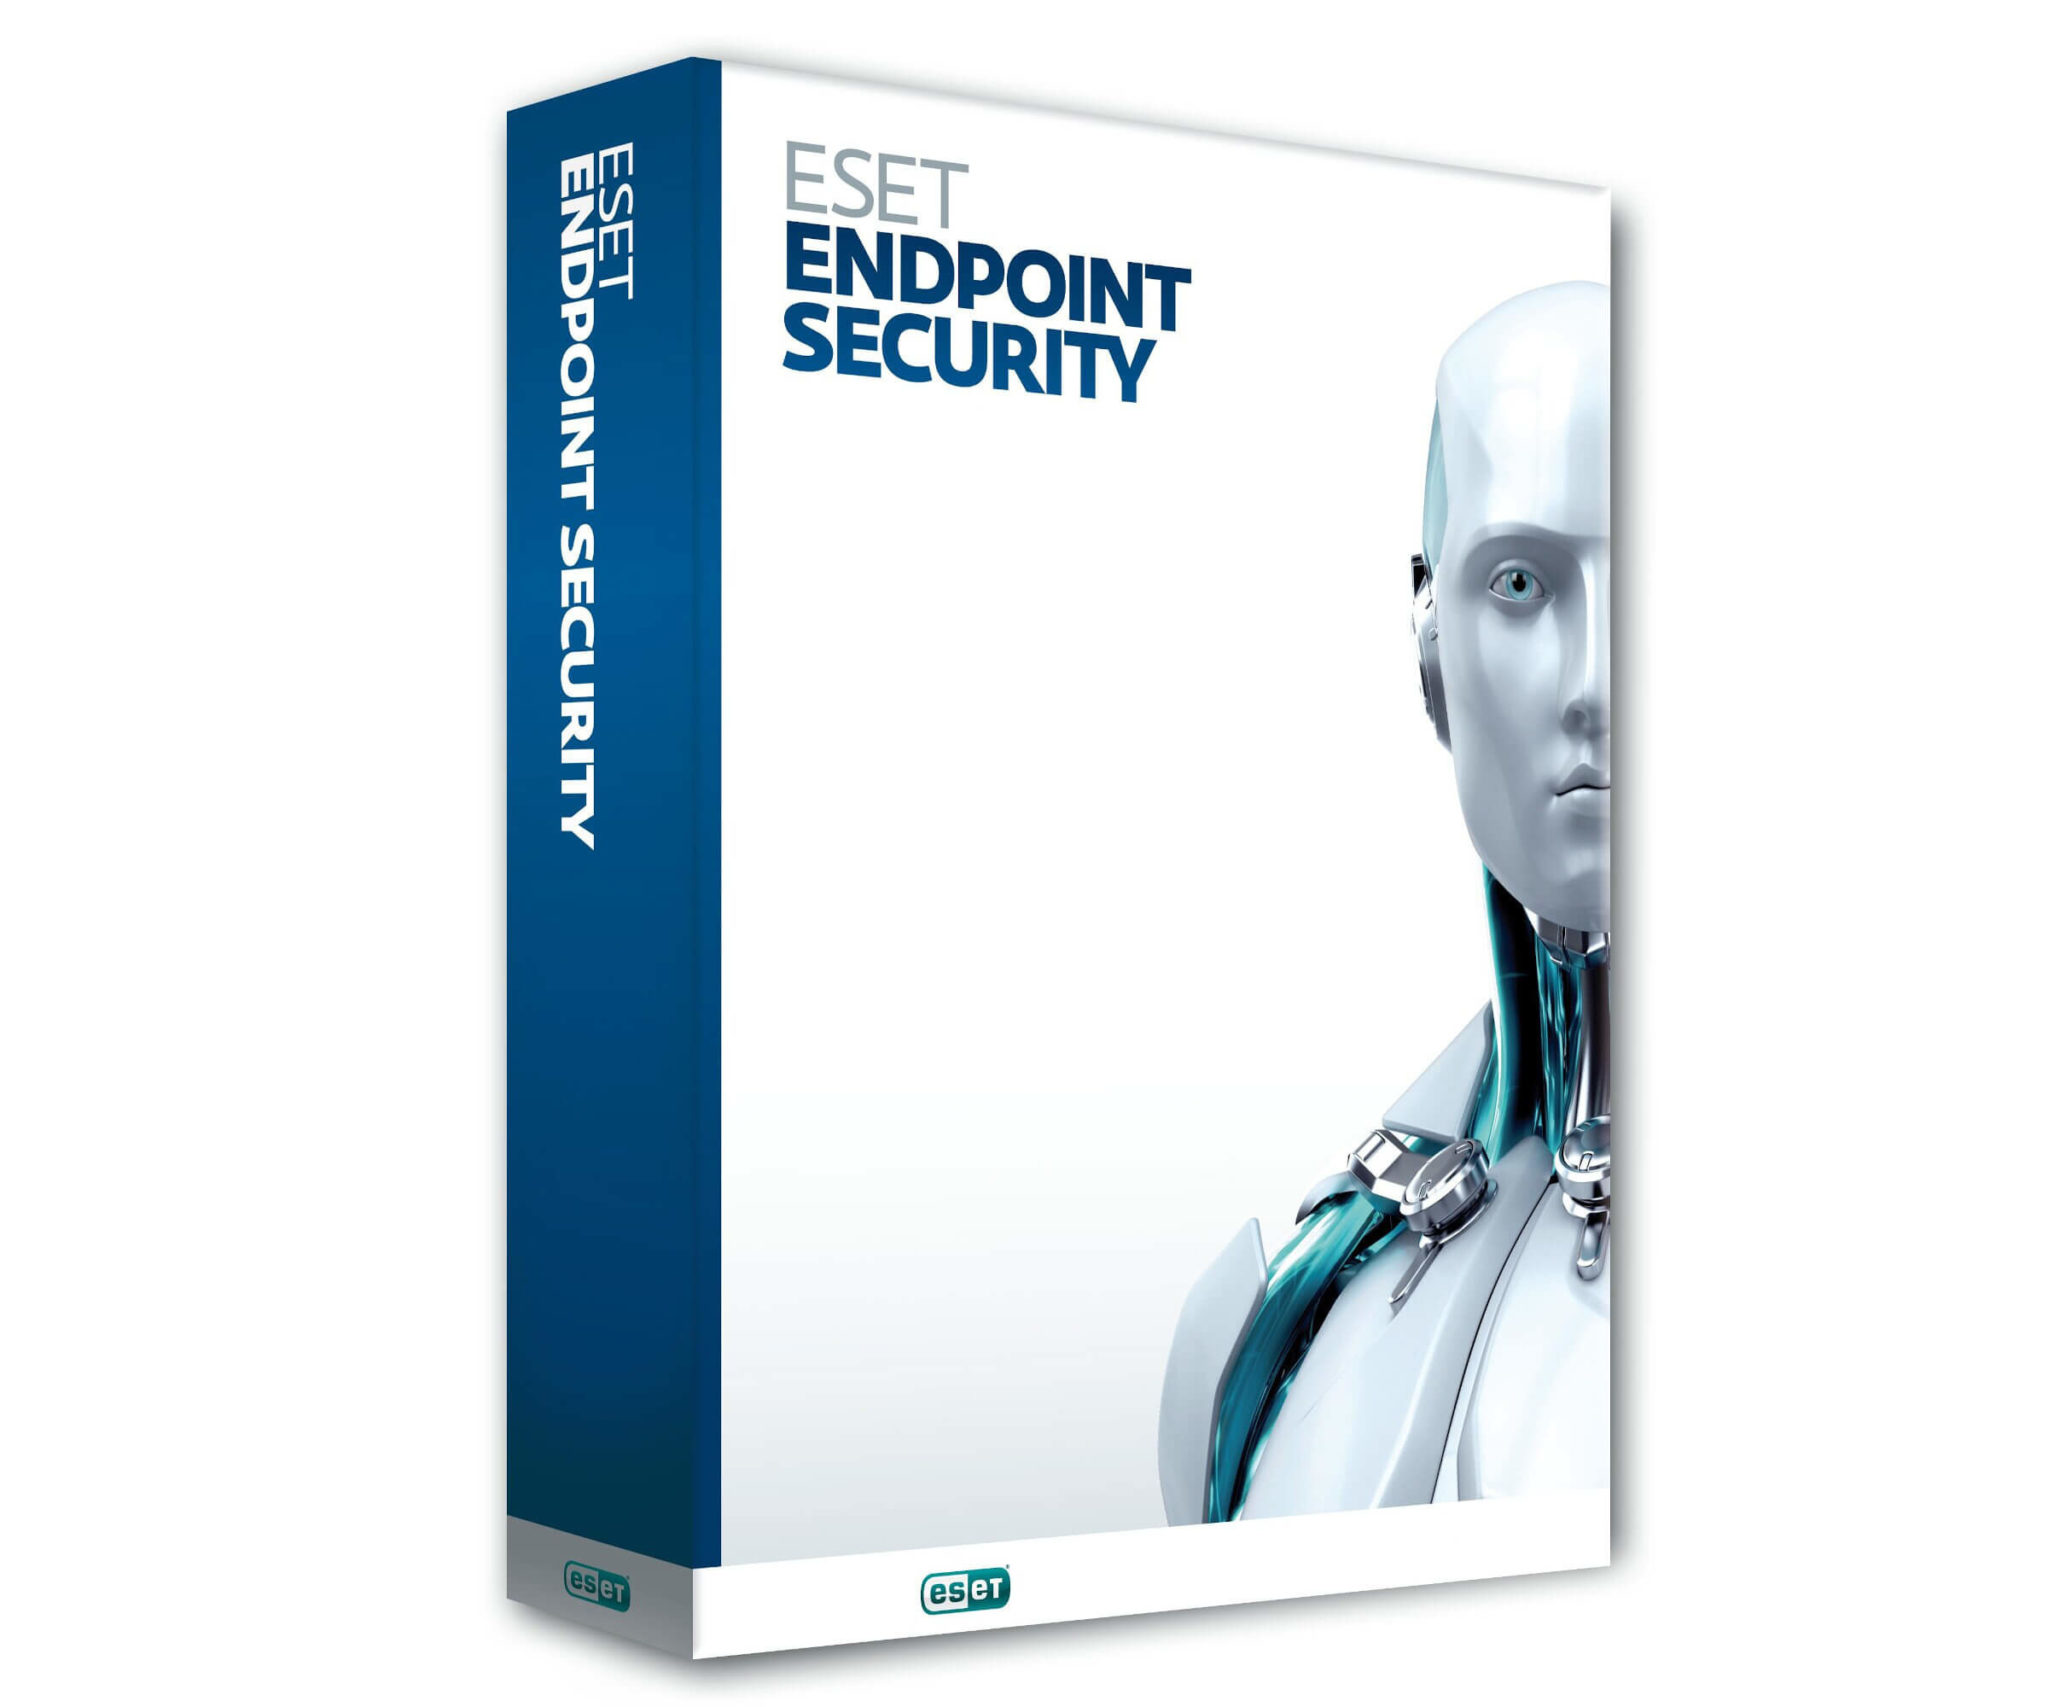 download the new for mac ESET Endpoint Antivirus 10.1.2050.0